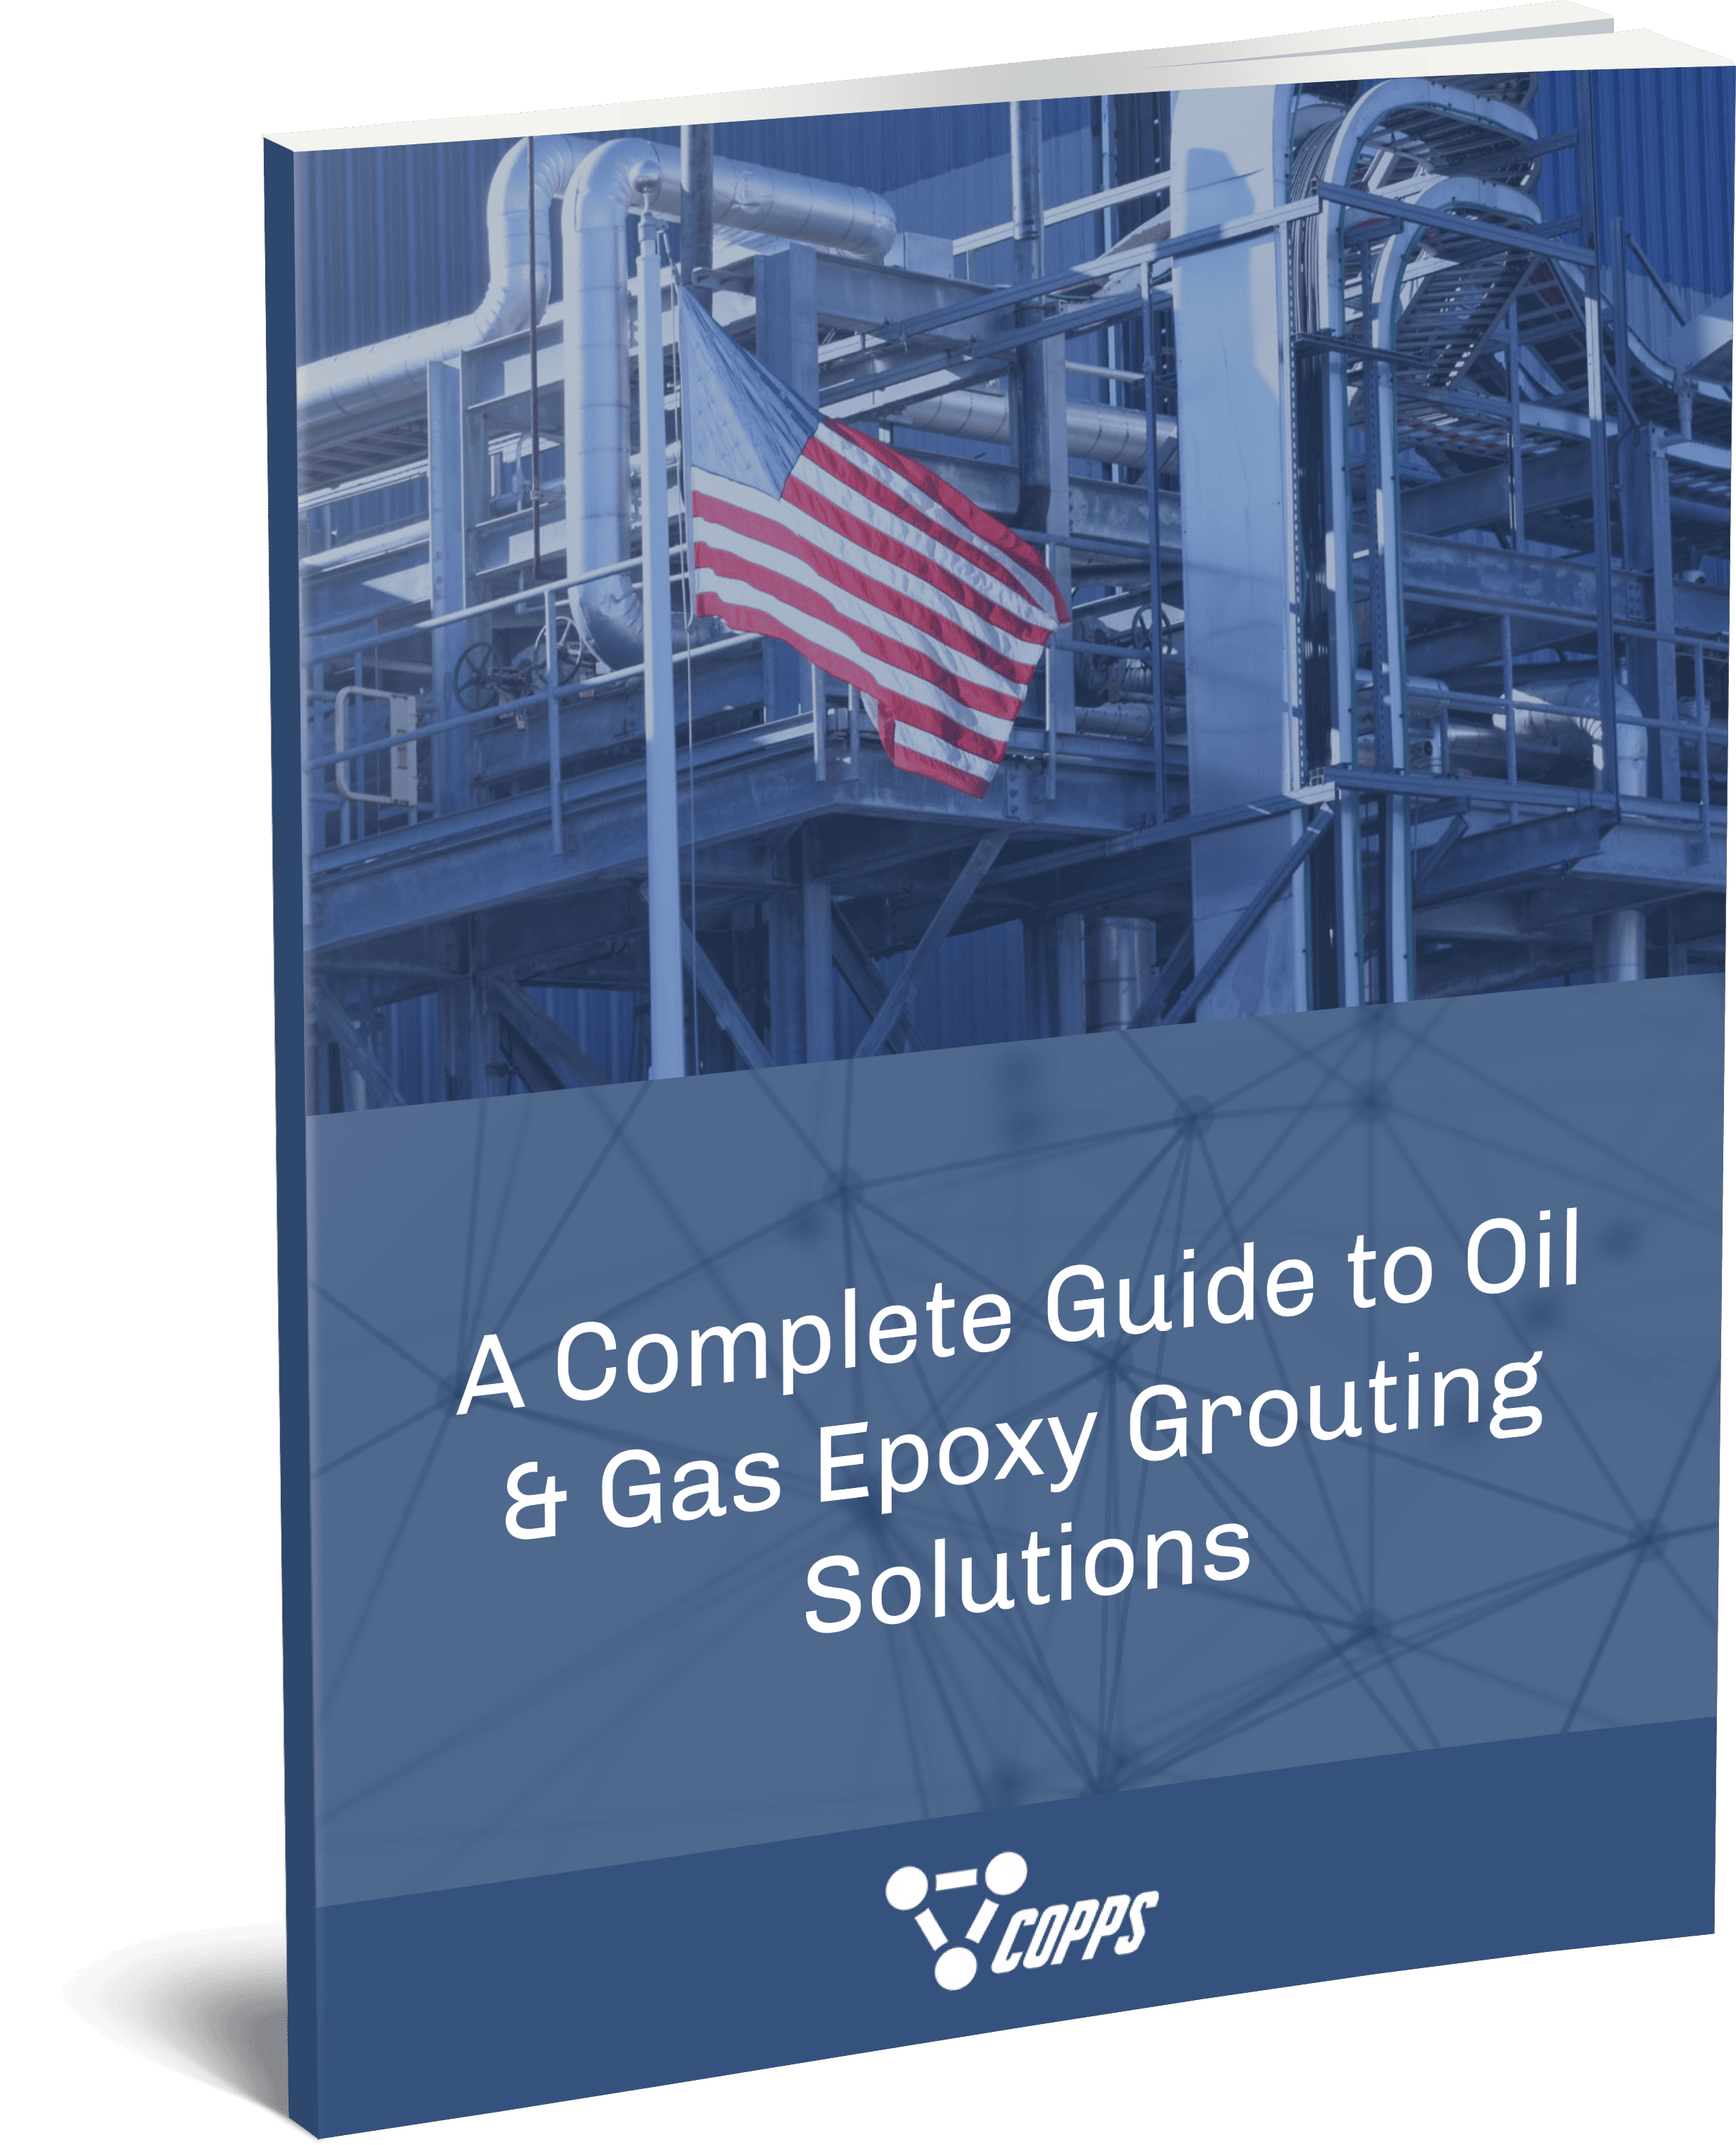 A Complete Guide to Oil and Gas Epoxy Grouting Solutions